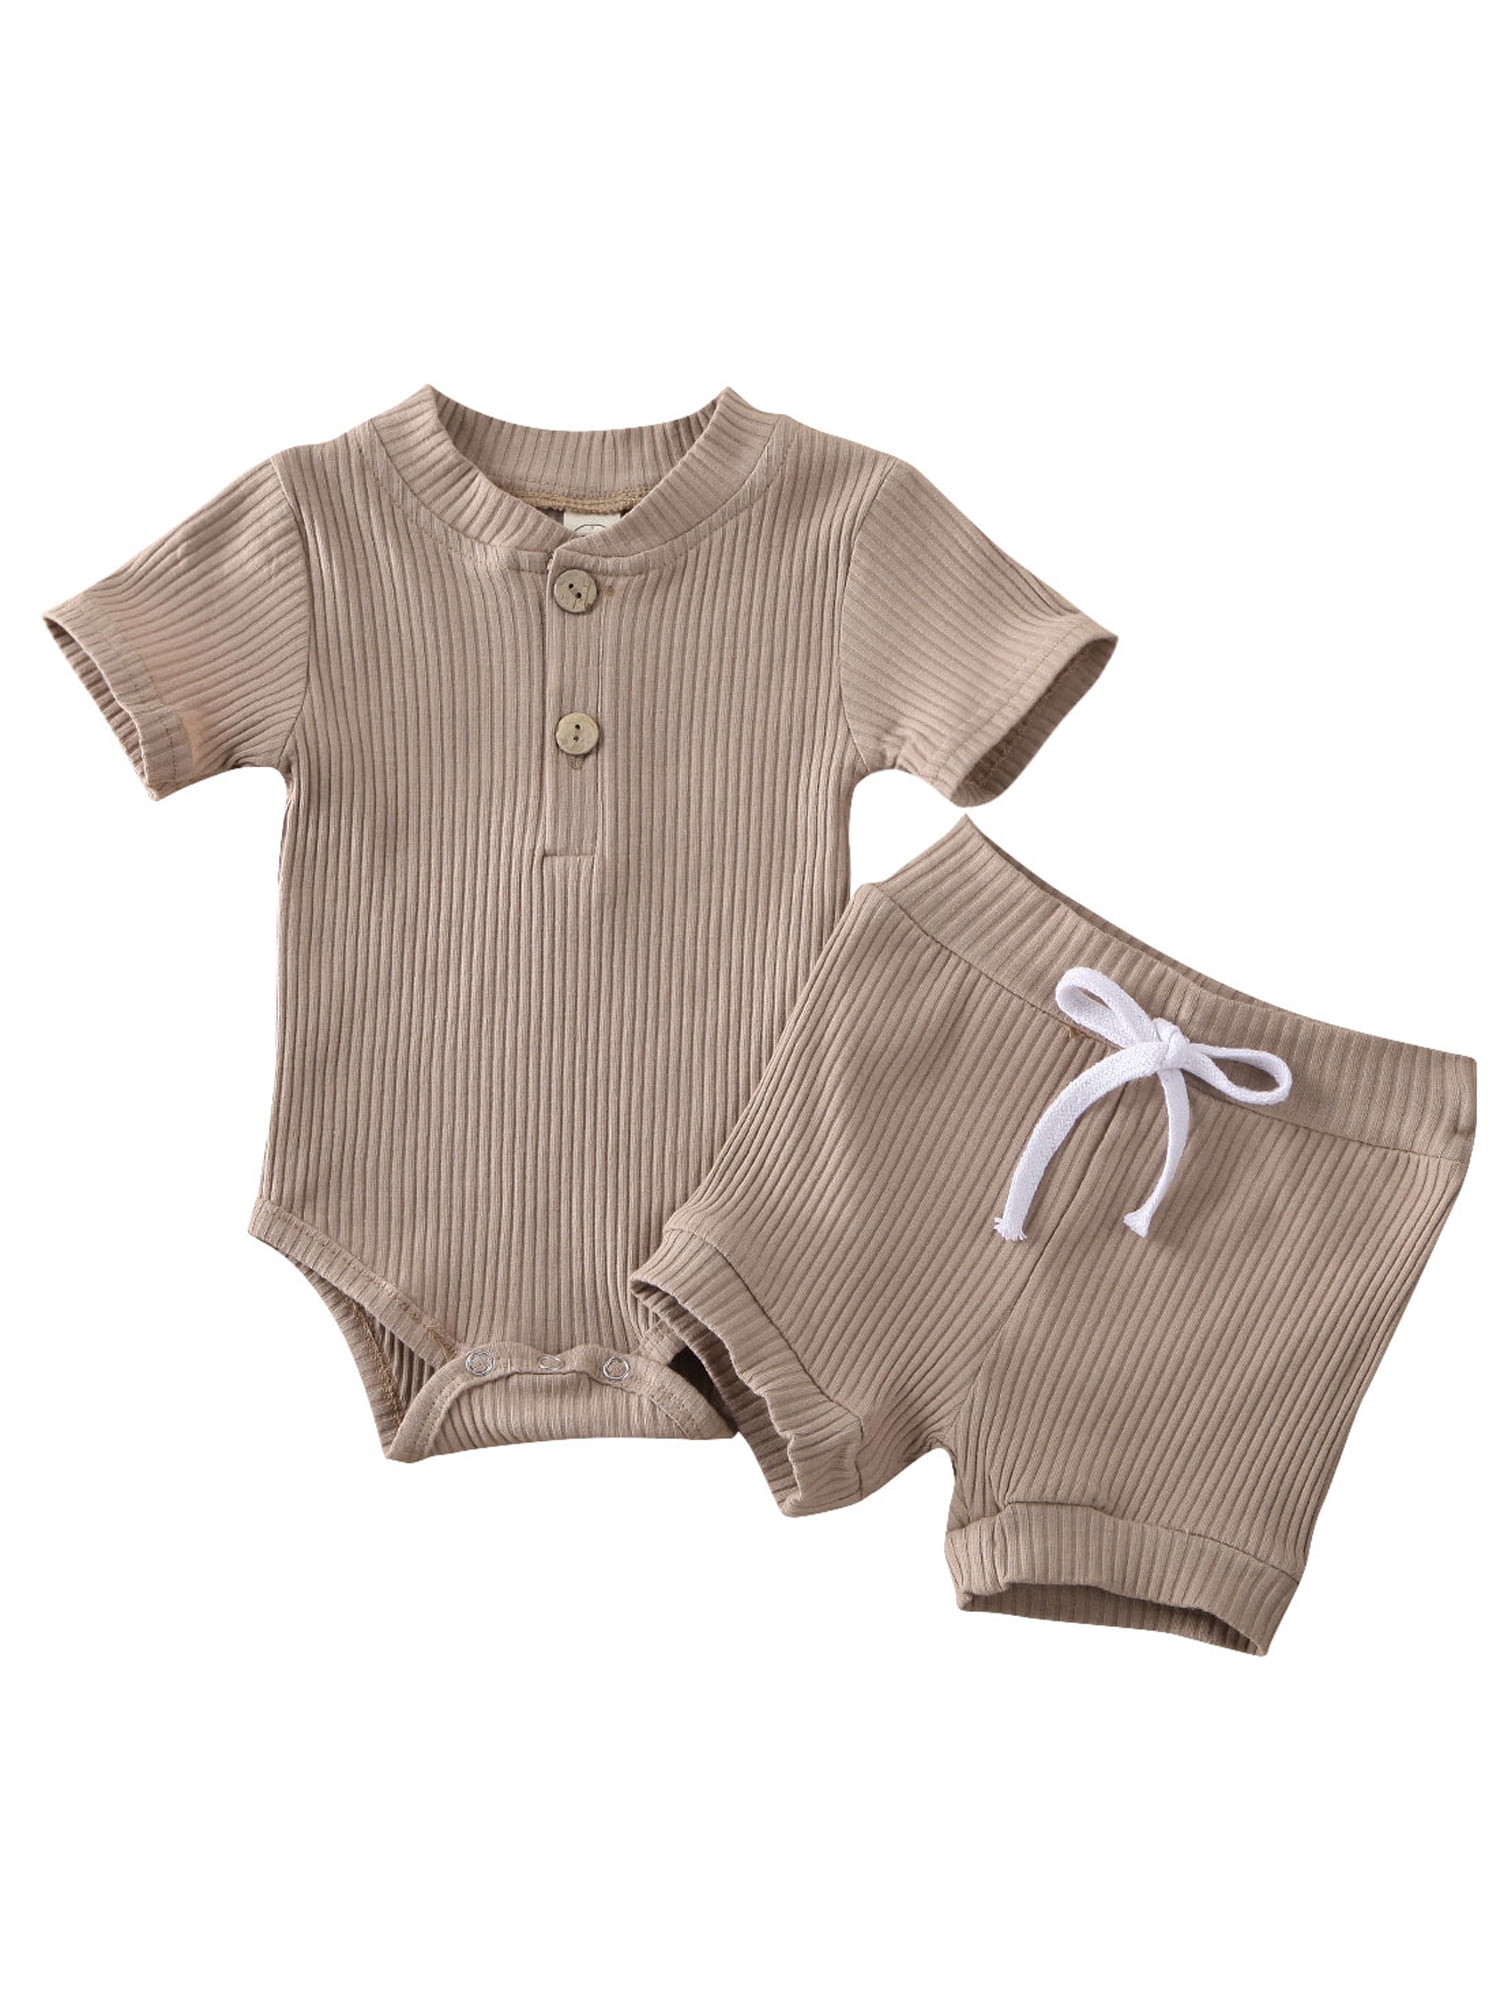 2Pcs Newborn Baby Girls Clothes Long Sleeves Romper Words Top Bodysuit Striped Pleated Pants Outfits Clothings